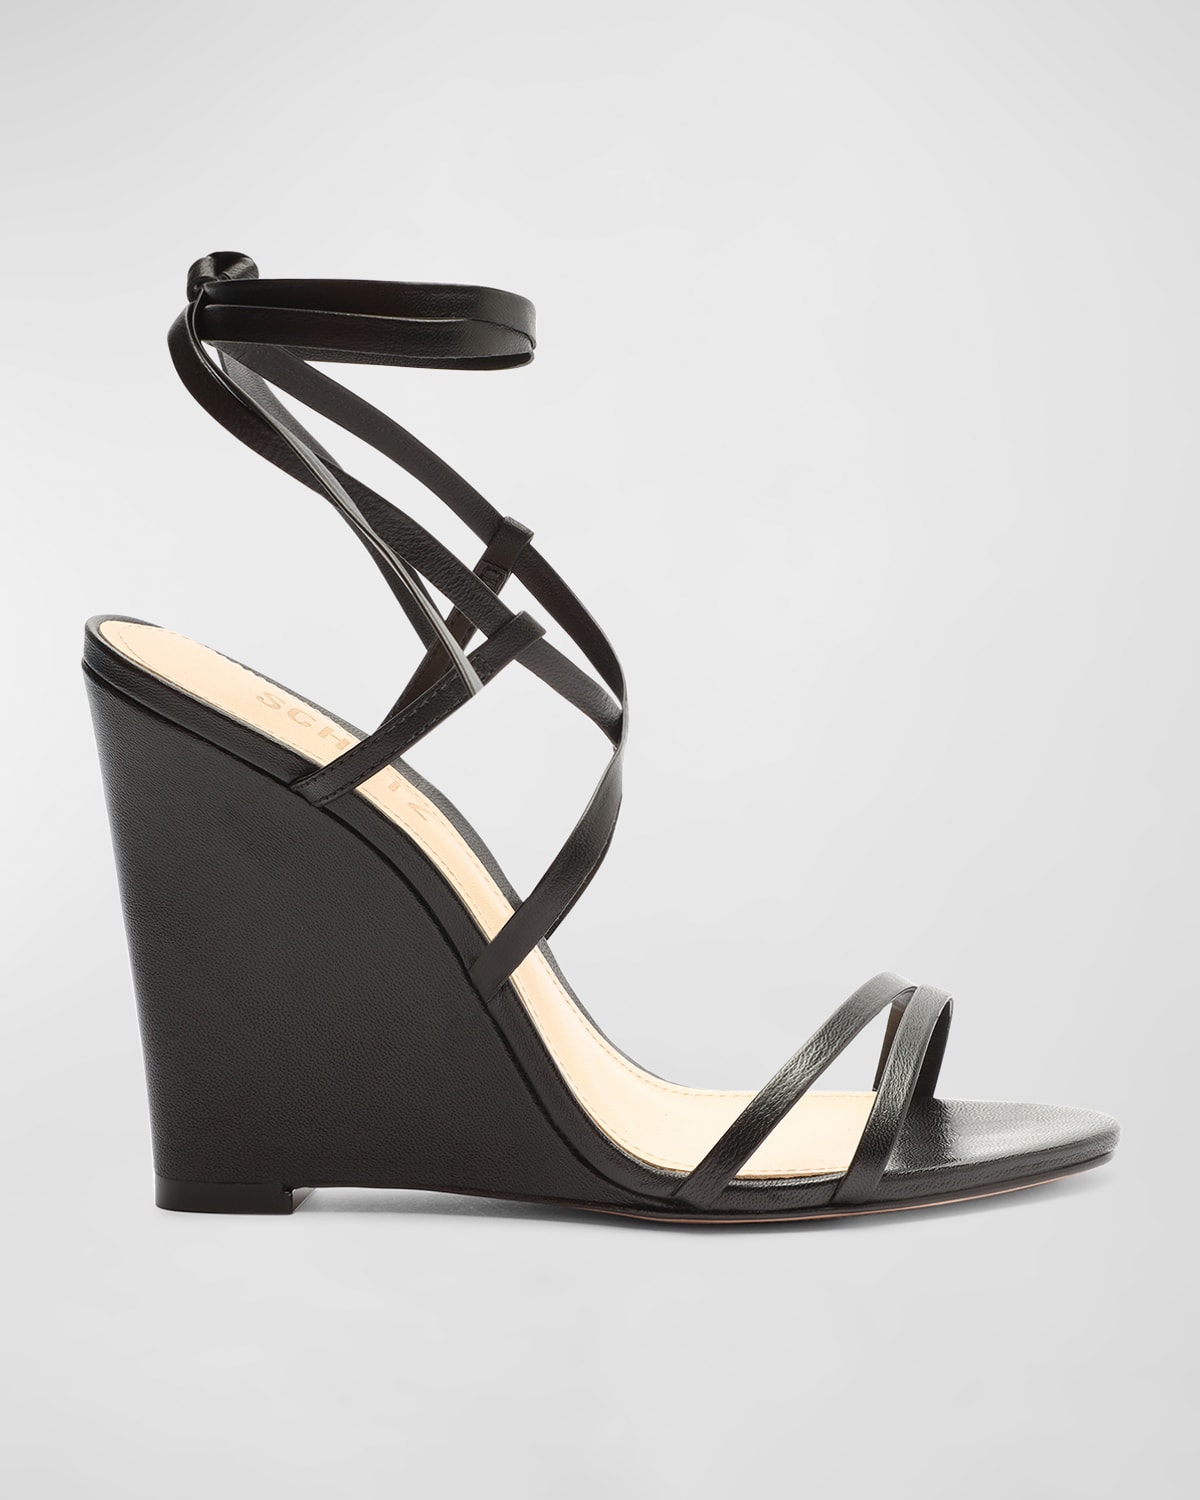 Deonne Leather Ankle-Tie Wedge Sandals